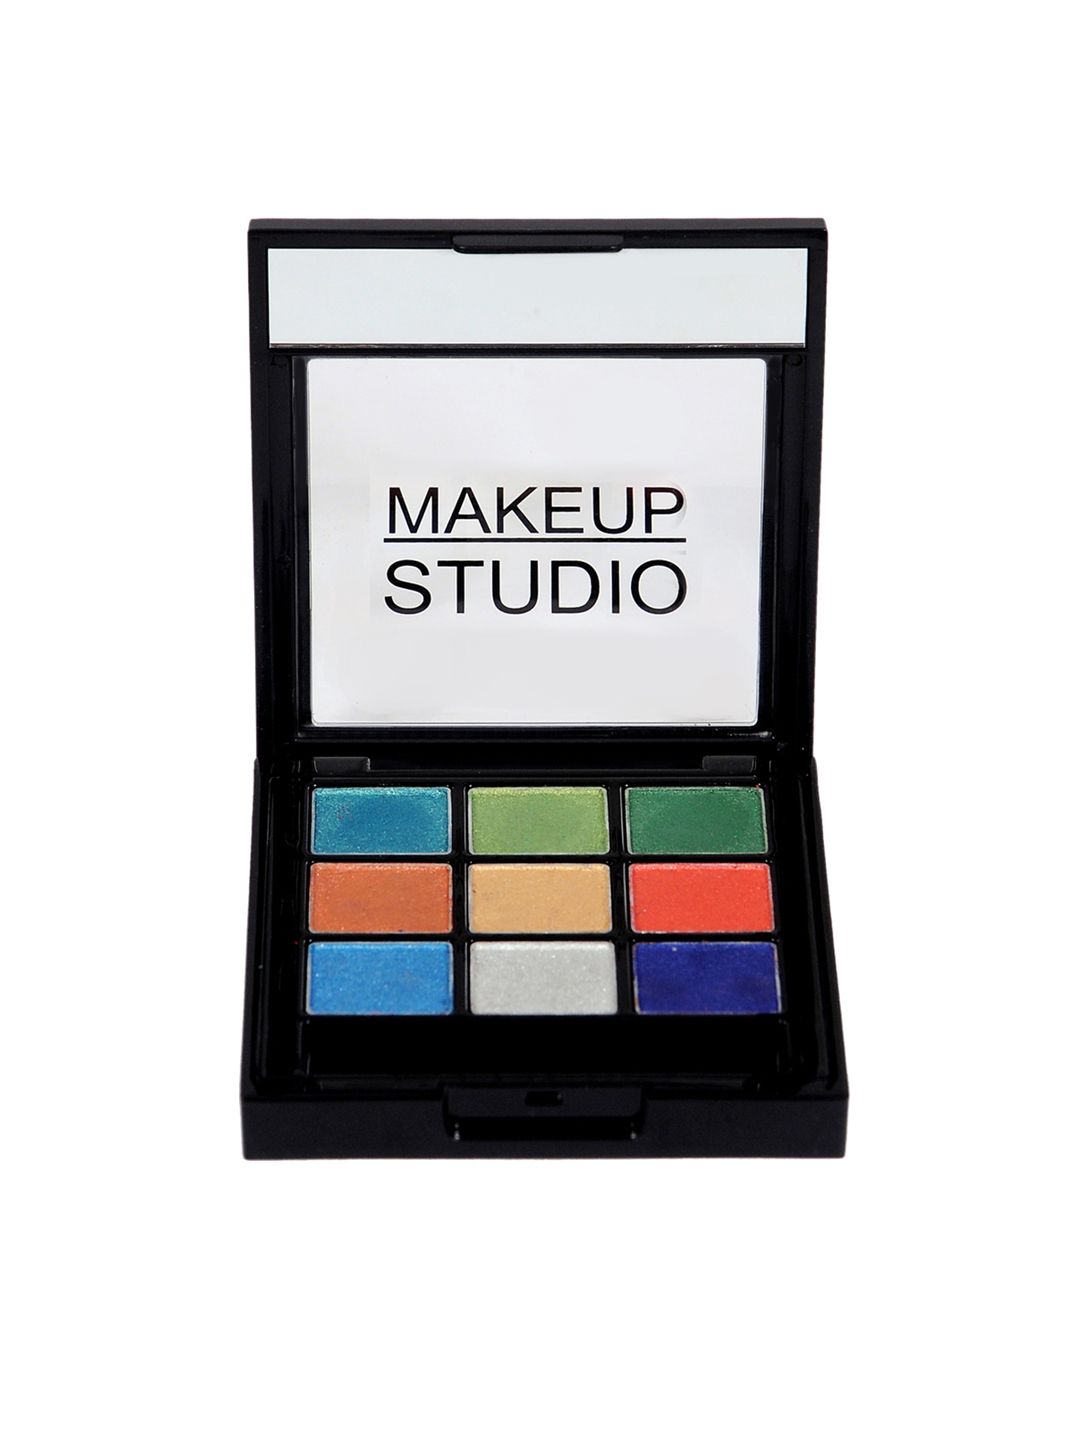 INCOLOR Make Up Studio 9 In 1 Eyeshadow Palette 02 - 18 g Price in India